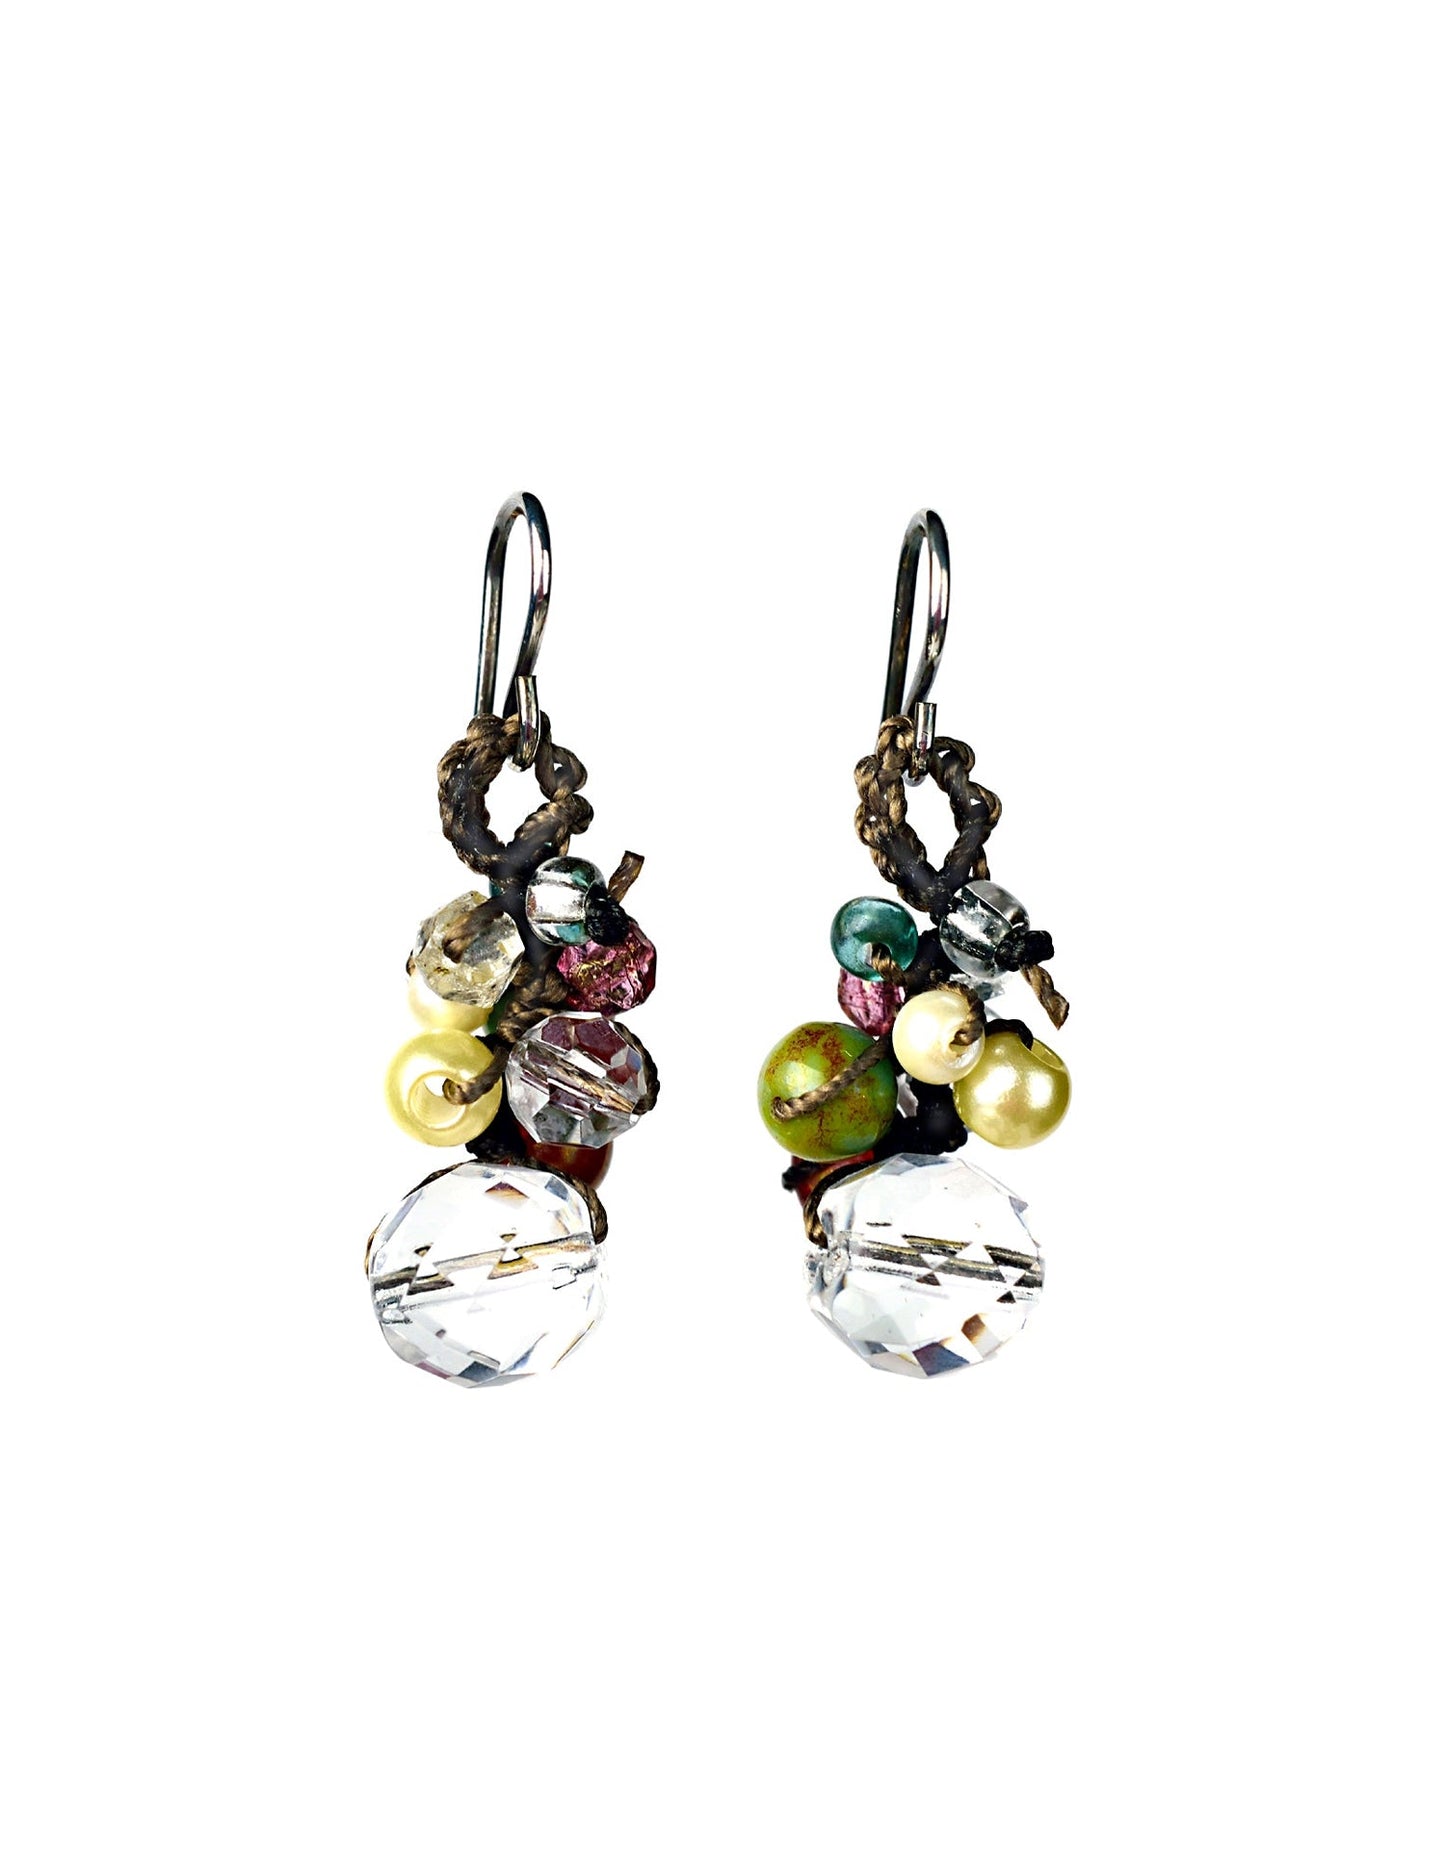 onujewelry.com - Hand-knotted Lola Love earrings featuring semi-precious stones by Donna SIlvestri, On U Jewelry, Richmond, VA